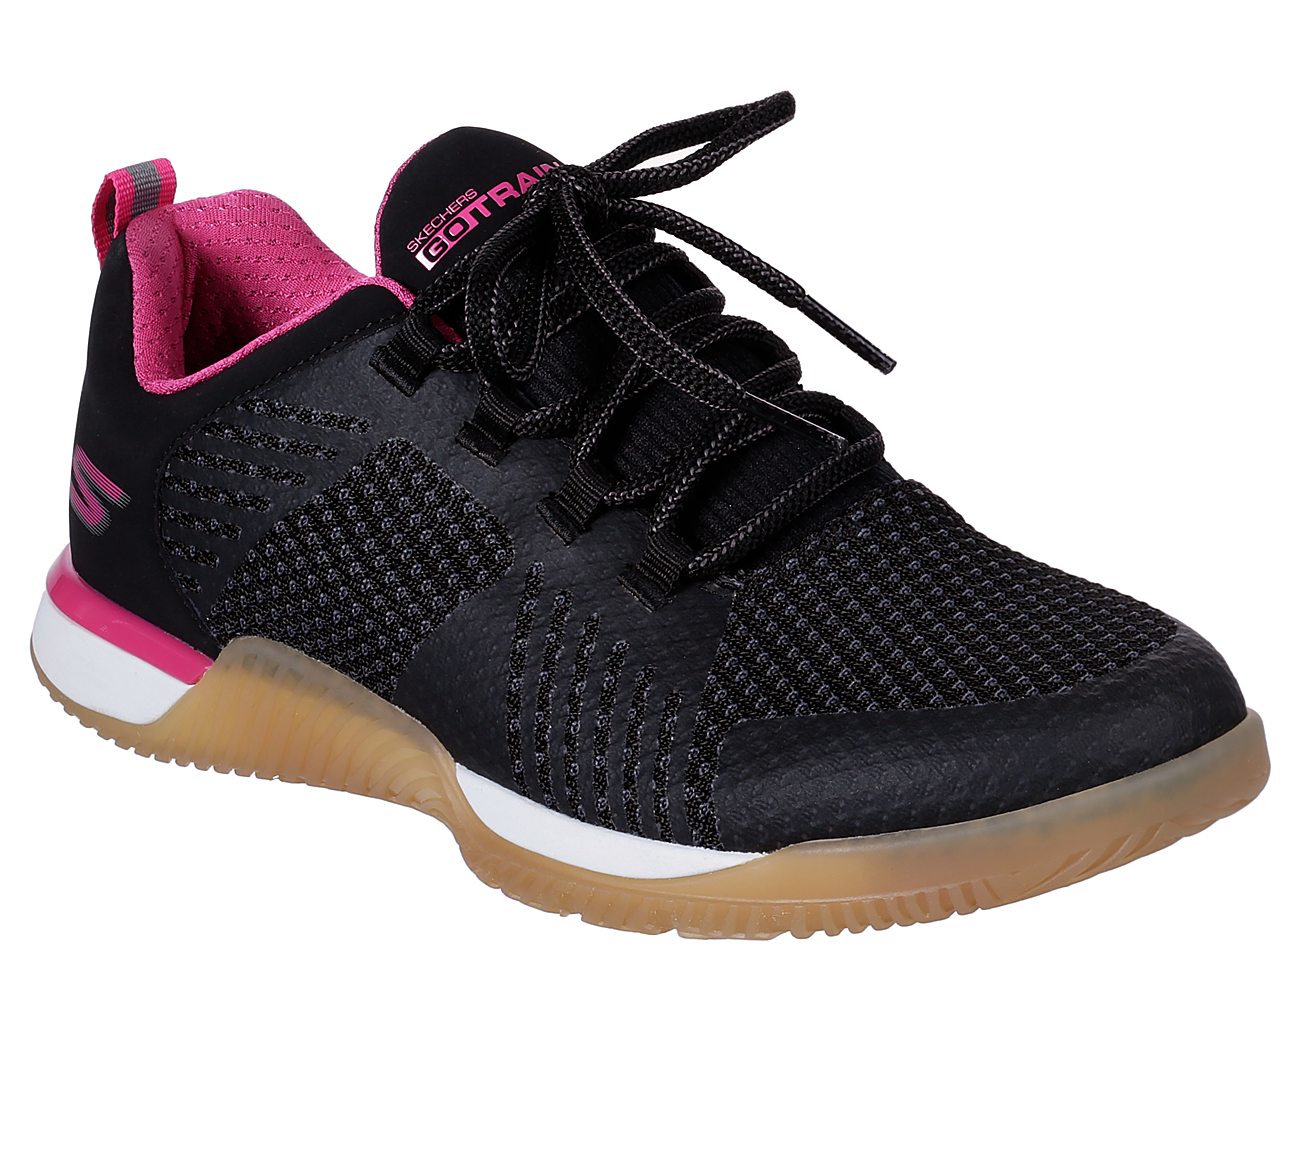 VIPER -, BLACK/HOT PINK Footwear Lateral View